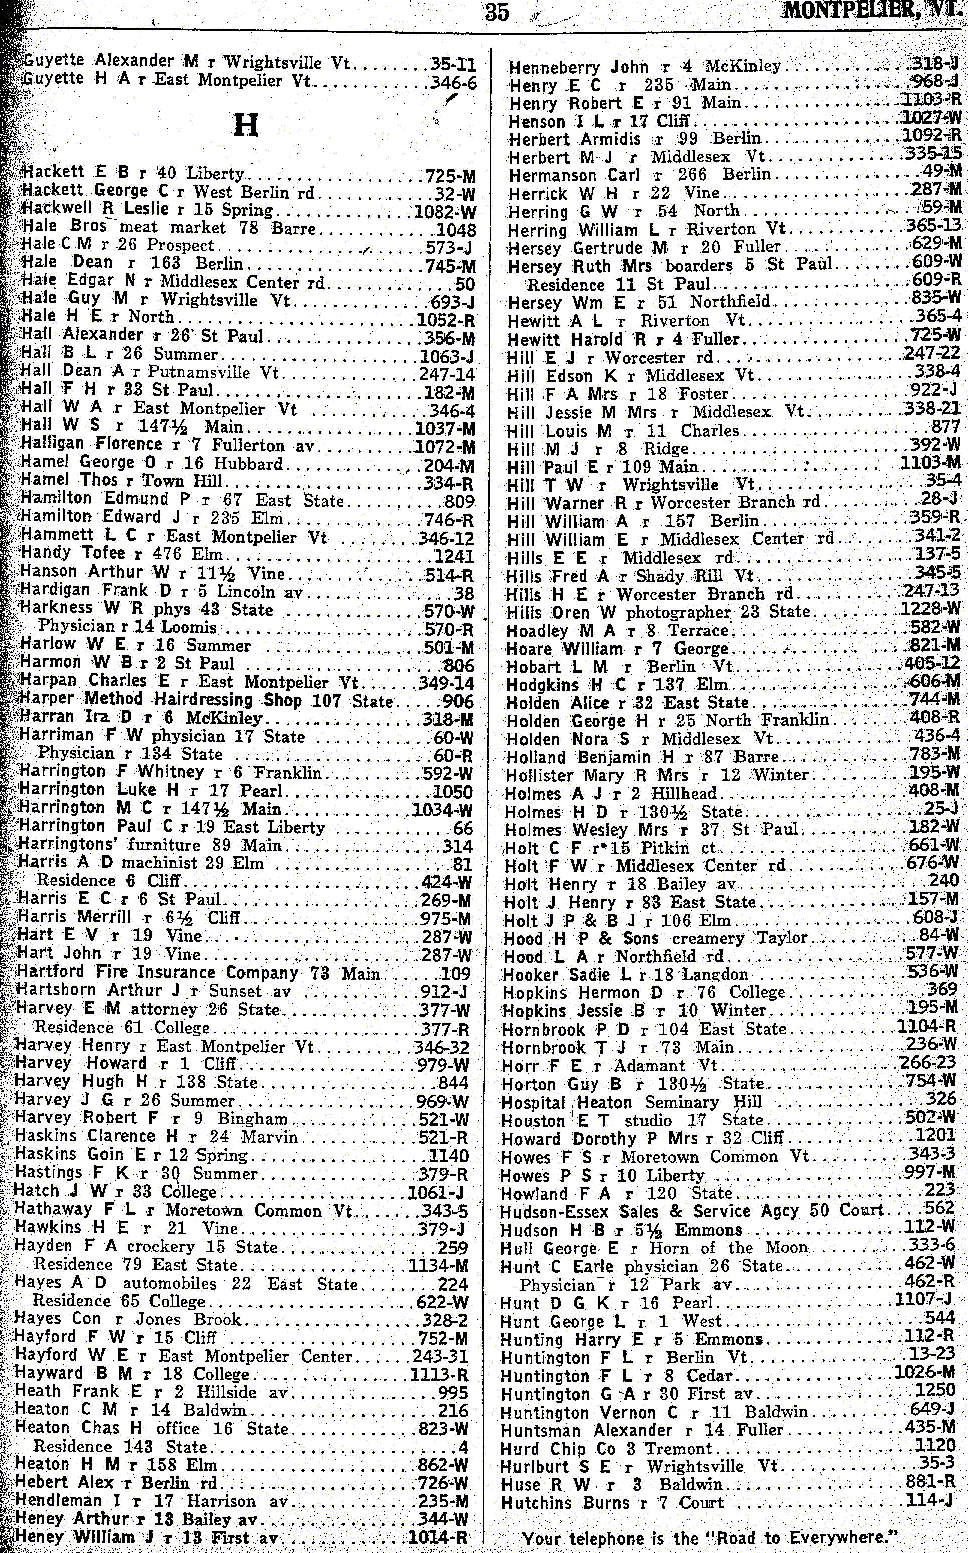 1928 Montpelier Vt Telephone Book - Page 35